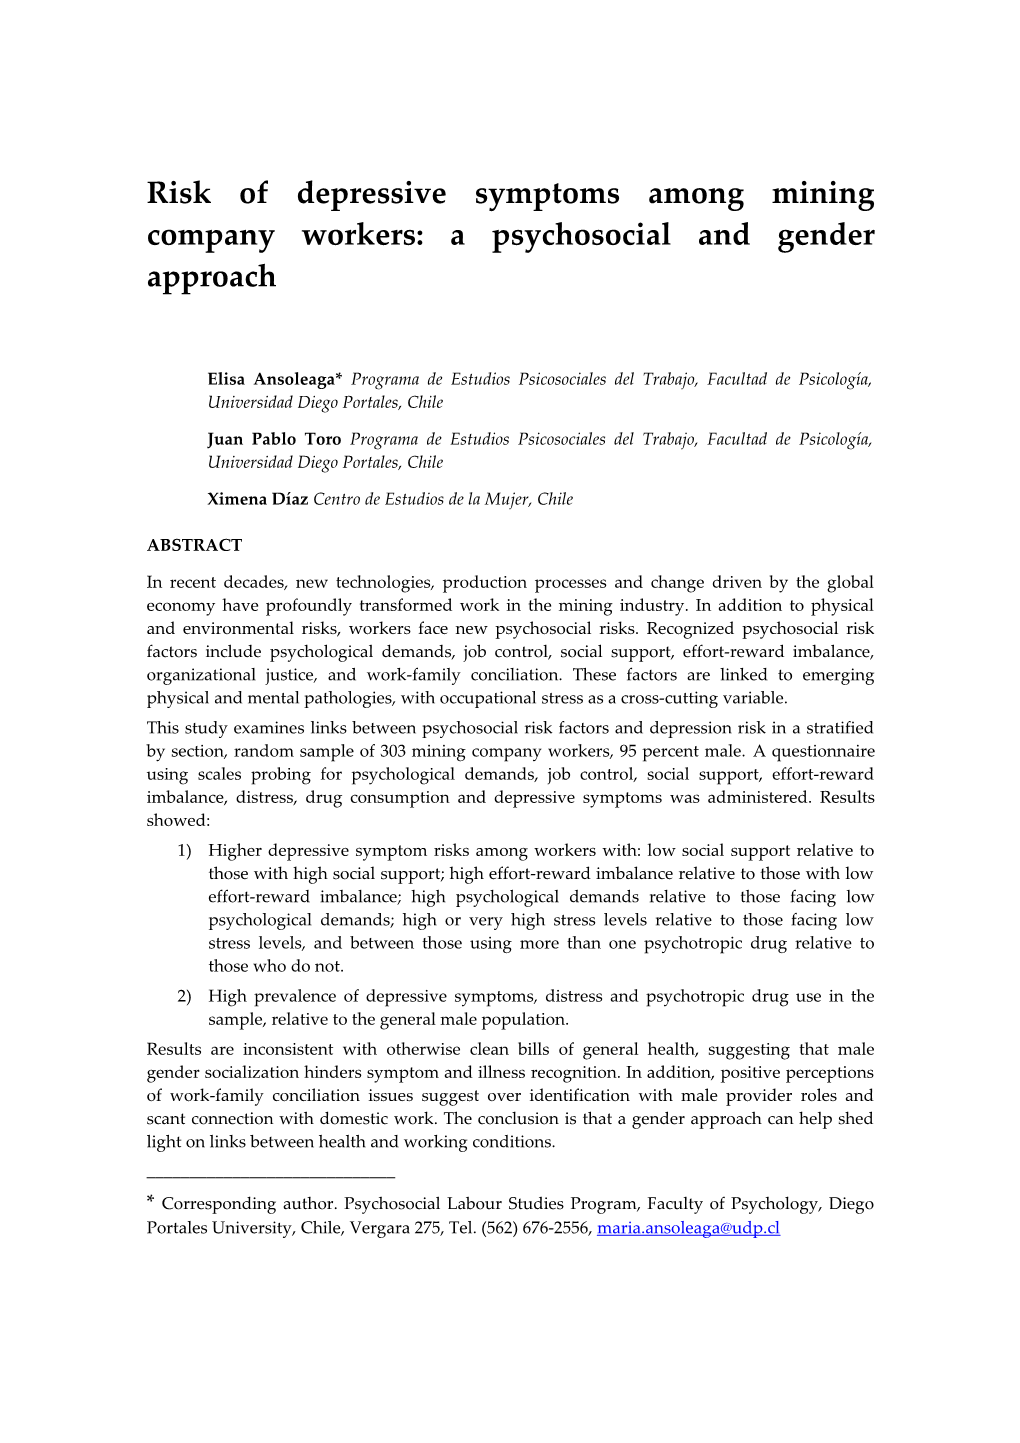 Risk of Depressive Symptoms Among Mining Company Workers: a Psychosocial and Gender Approach